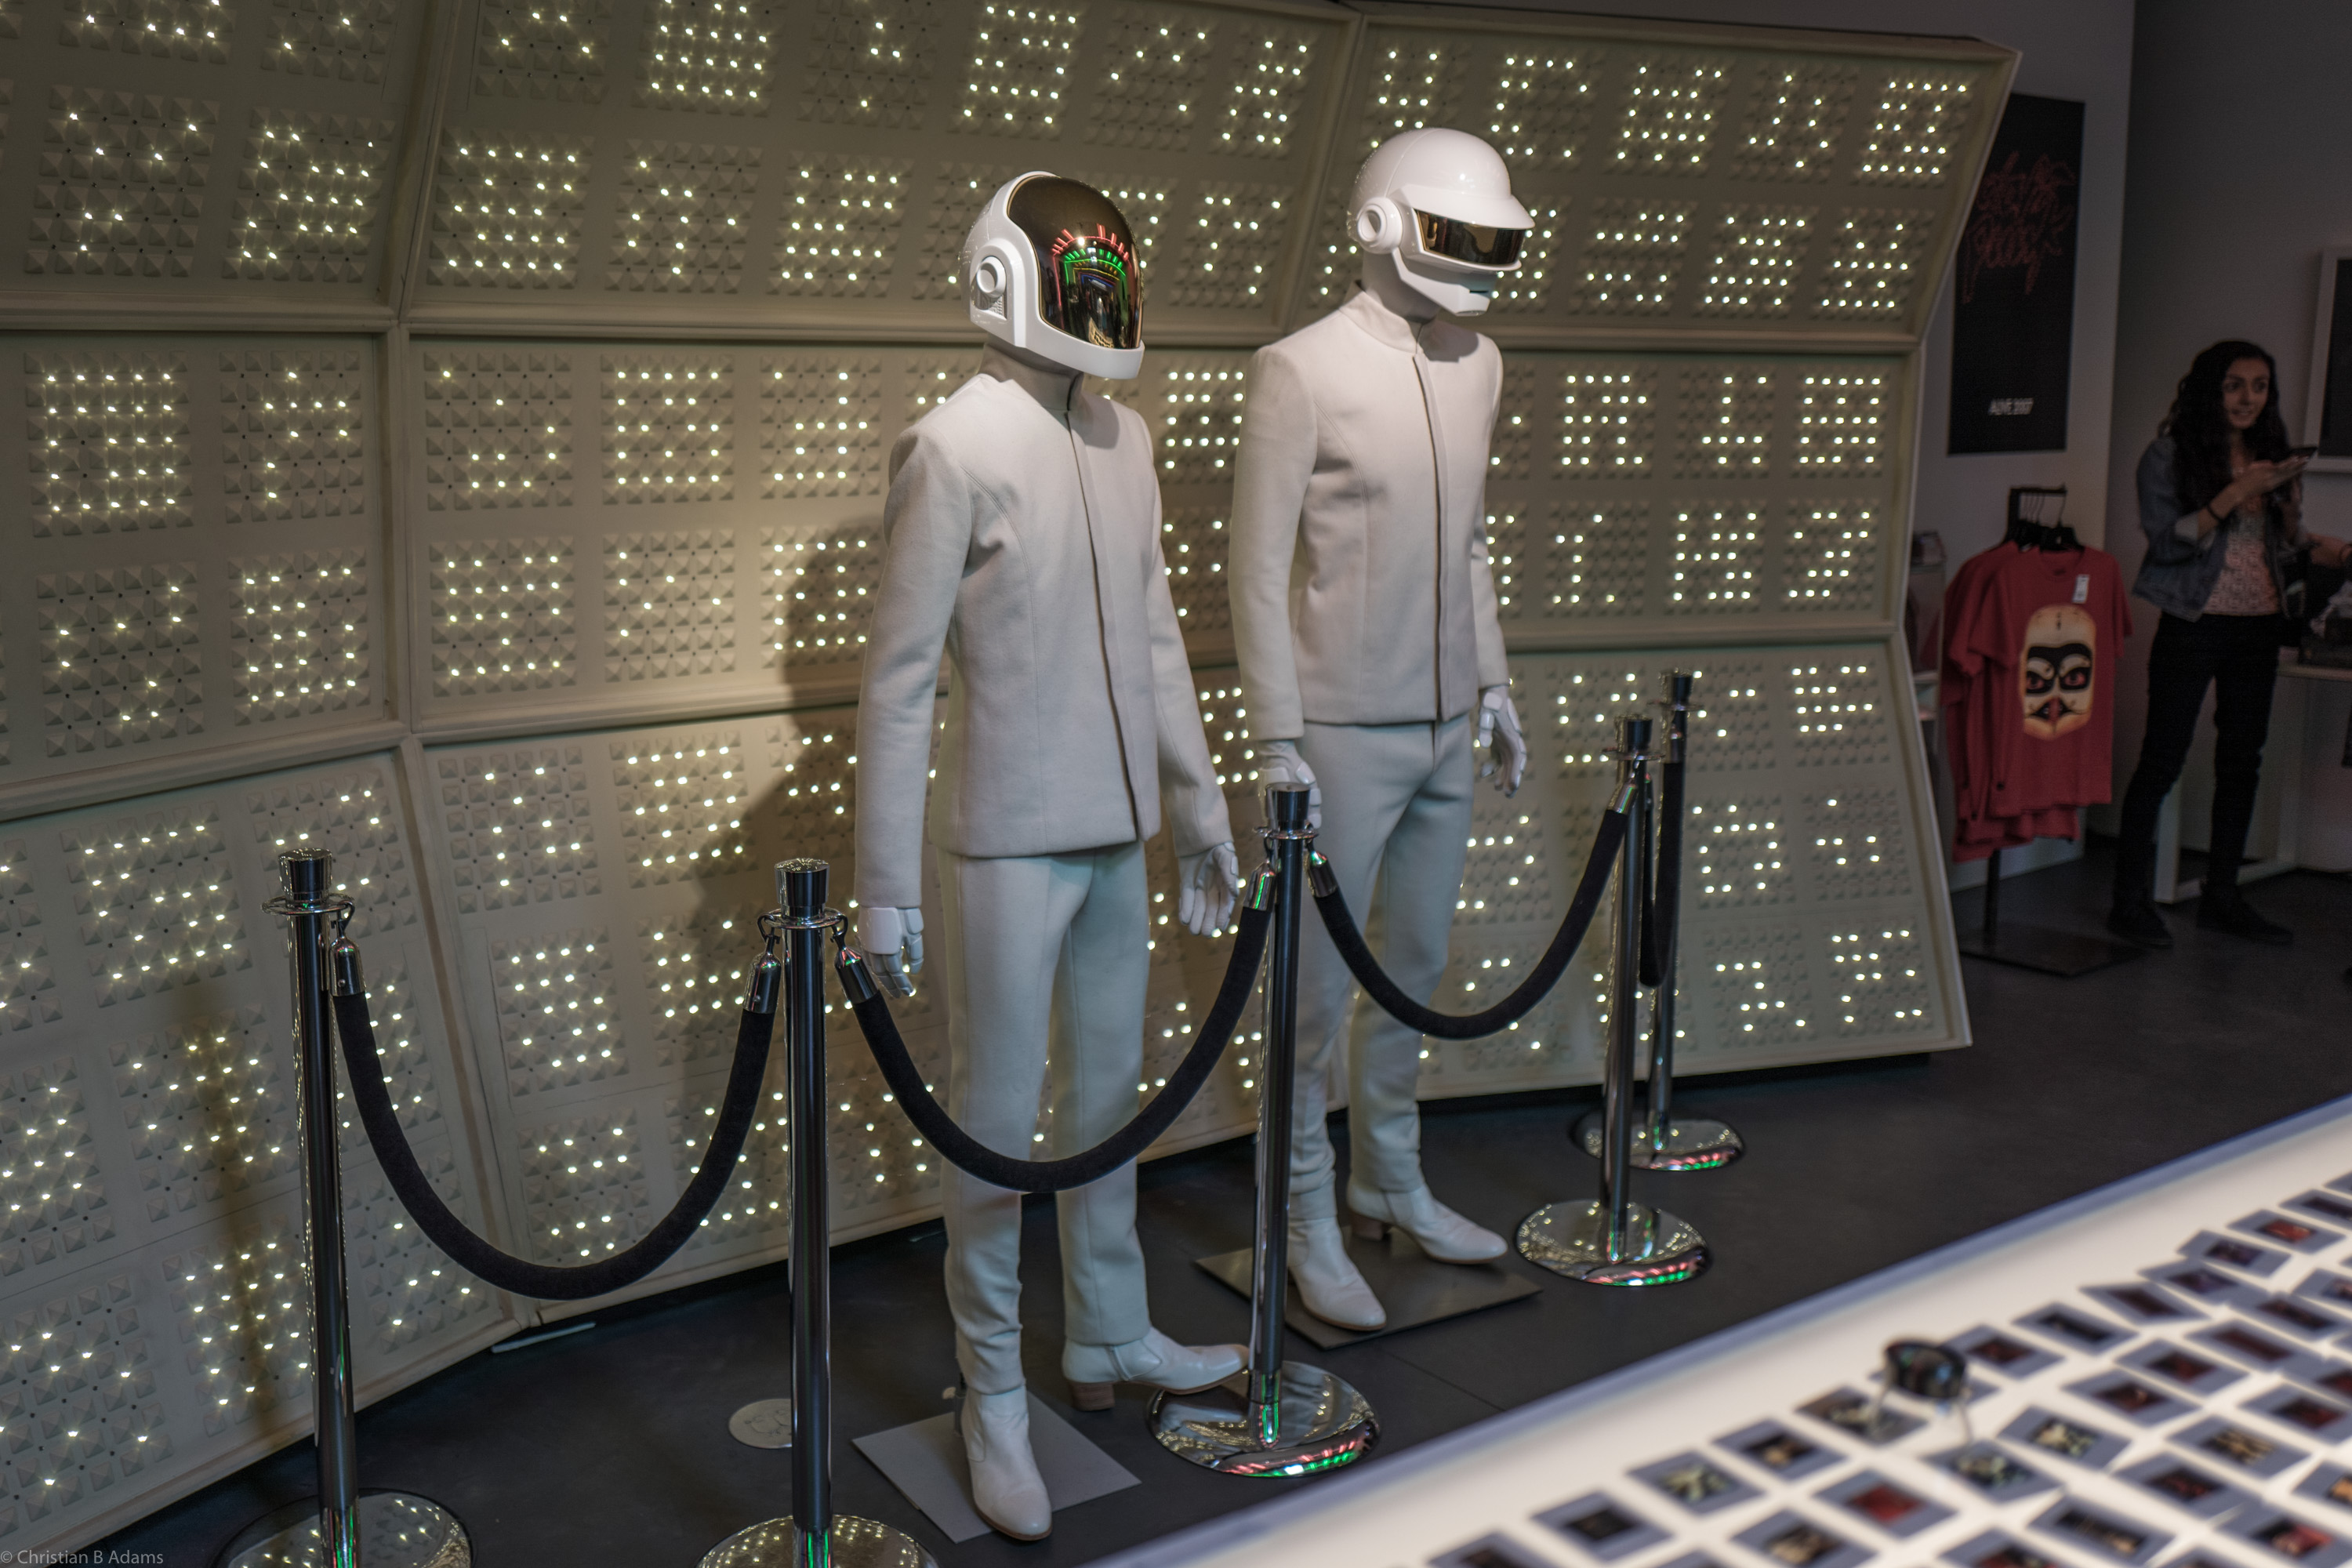 The robots (aka Thomas Bangalter and Guy-Manuel de Homem-Christo) who accepted the Grammy win for Random Access Memories in 2014, on display at the Daft Punk Pop Up at Maxfield Gallery Los Angeles in February of 2017.